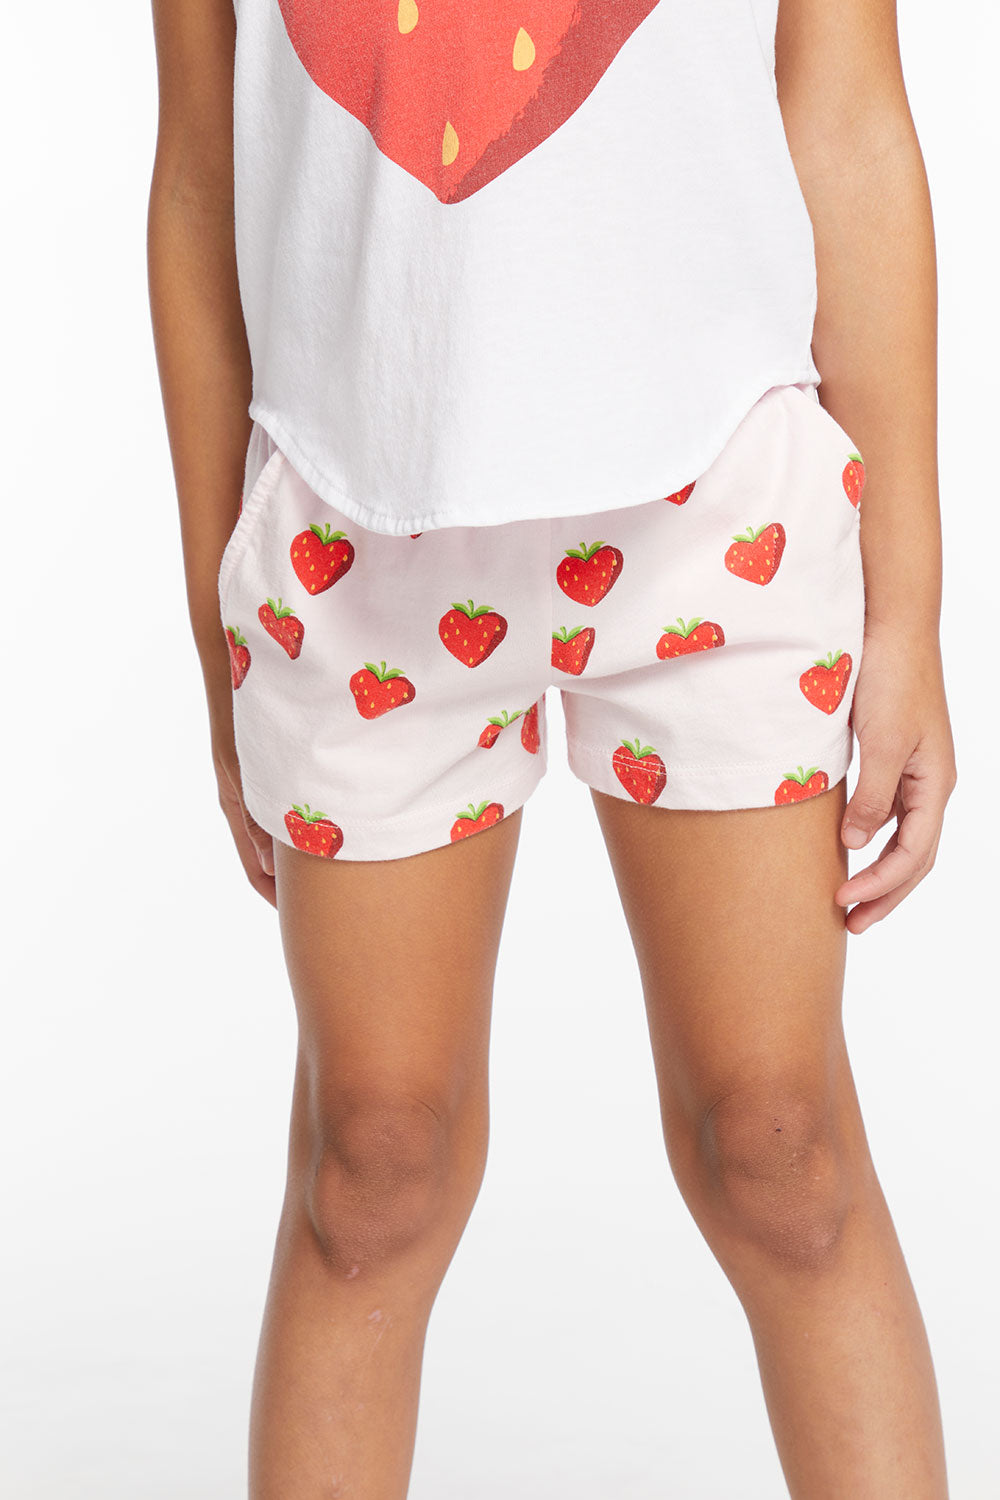 Heart Strawberry All Over Girls Shorts GIRLS chaserbrand